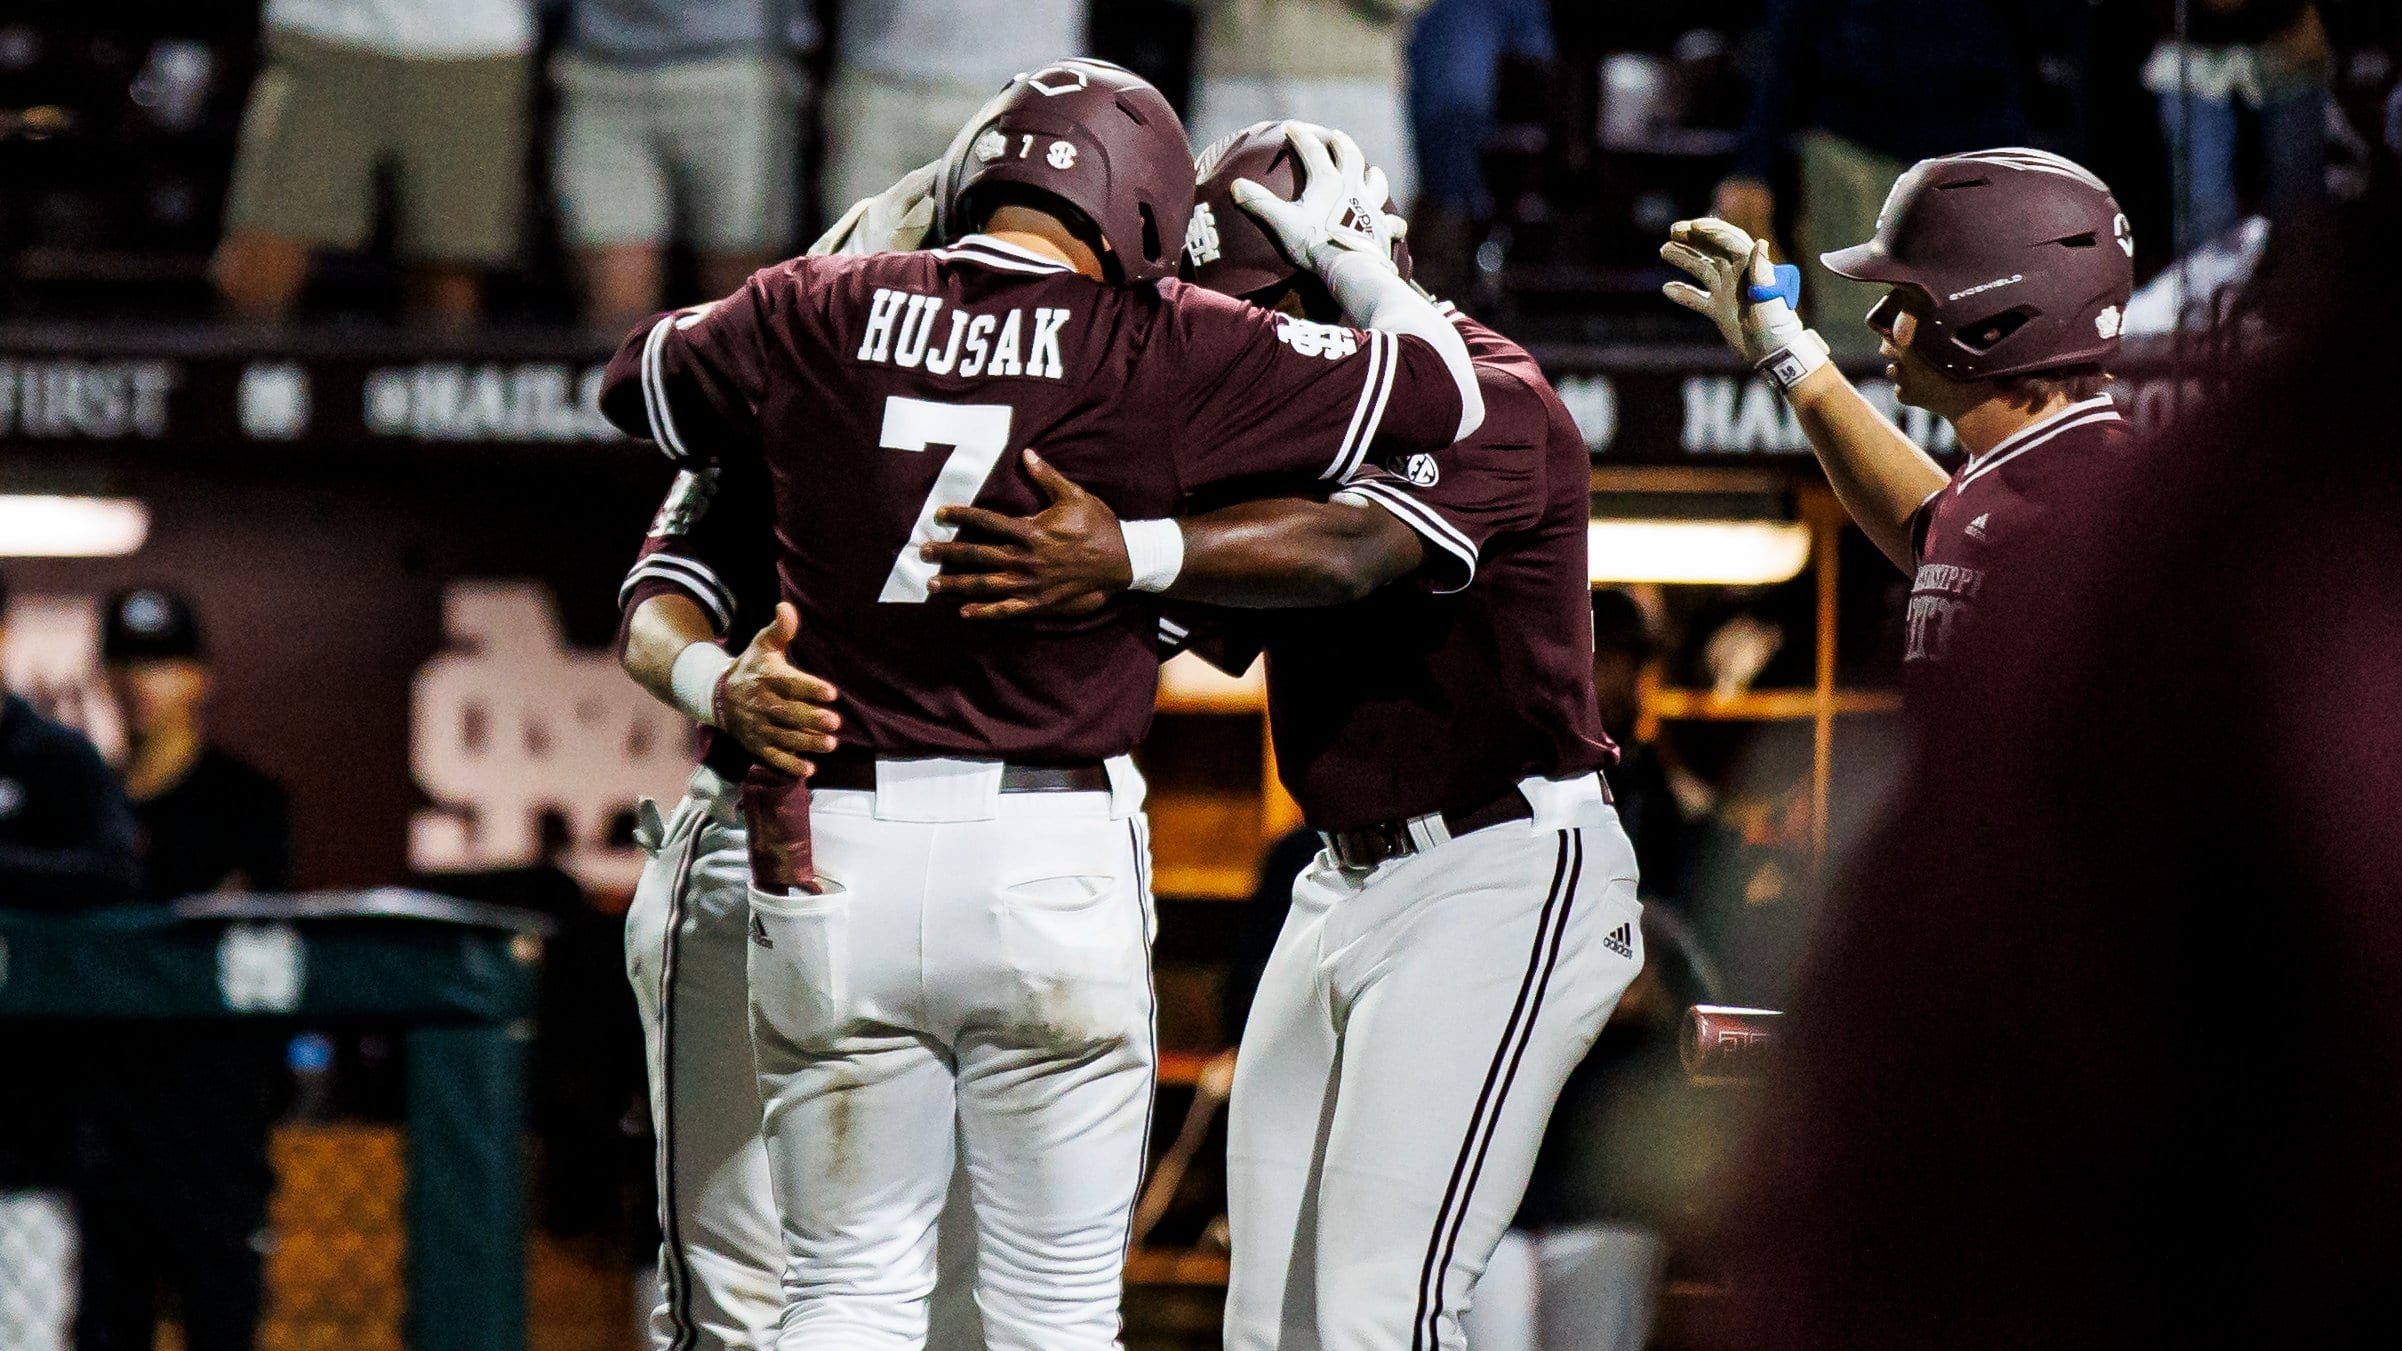 What Stood Out this Weekend for Mississippi State Baseball versus Ole Miss